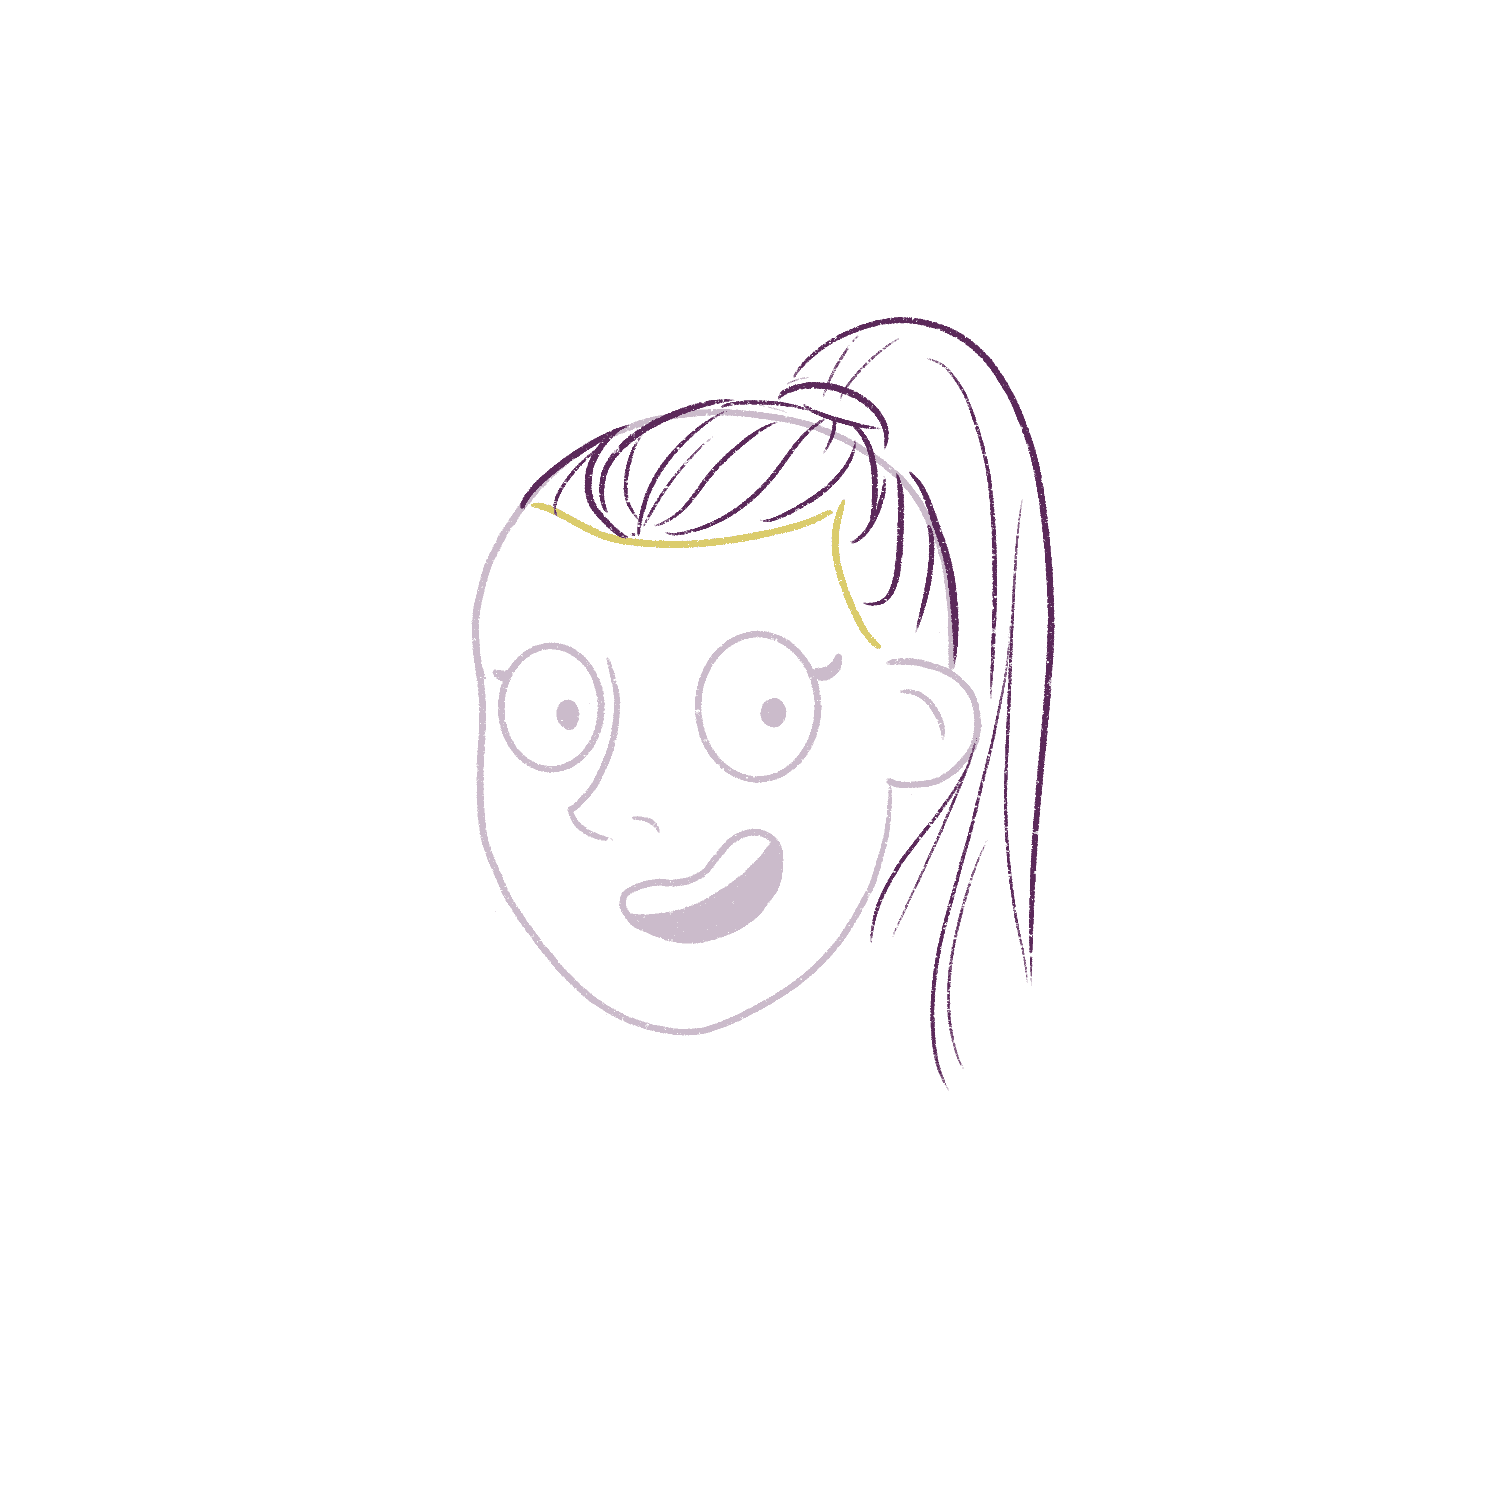 How to Draw a Girl with a Ponytail (Easy for Beginners)